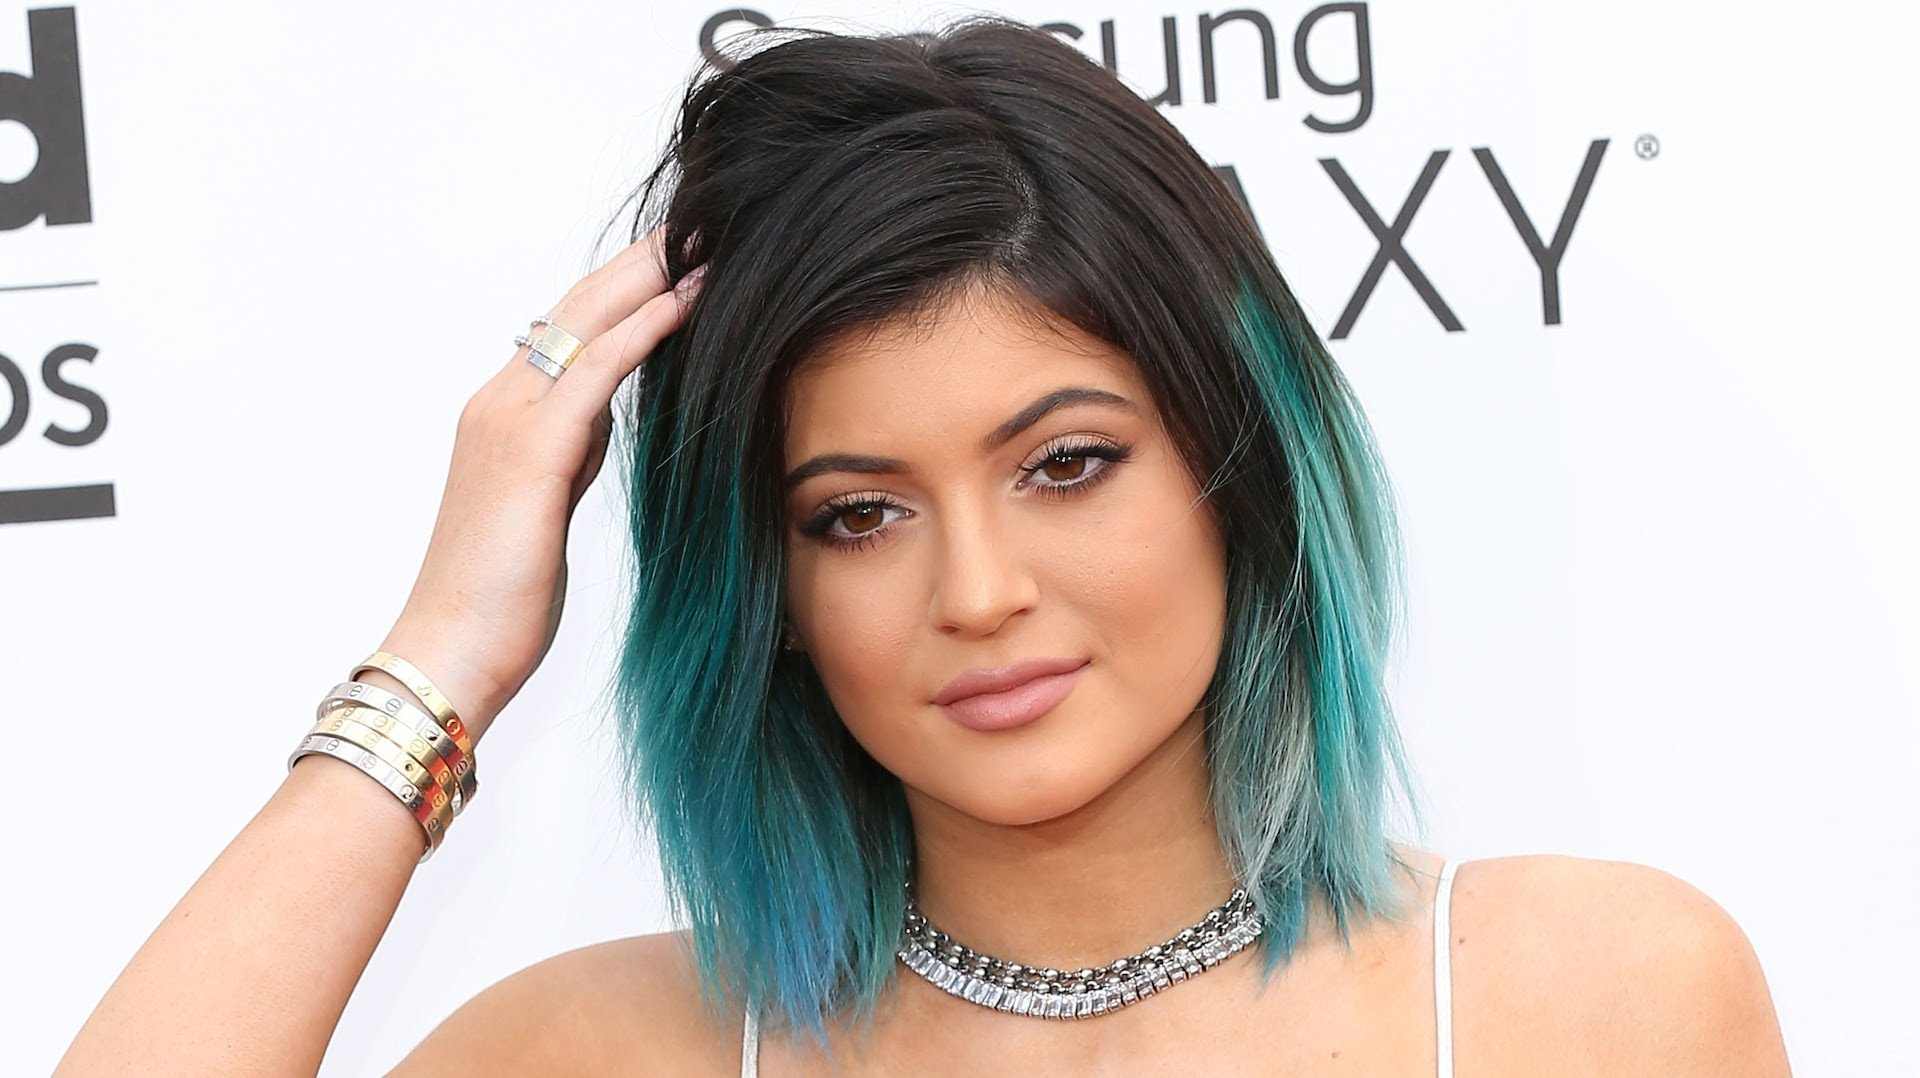 3. "10 Stunning Blue Jean Hair Color Ideas for Your Next Hair Appointment" - wide 8